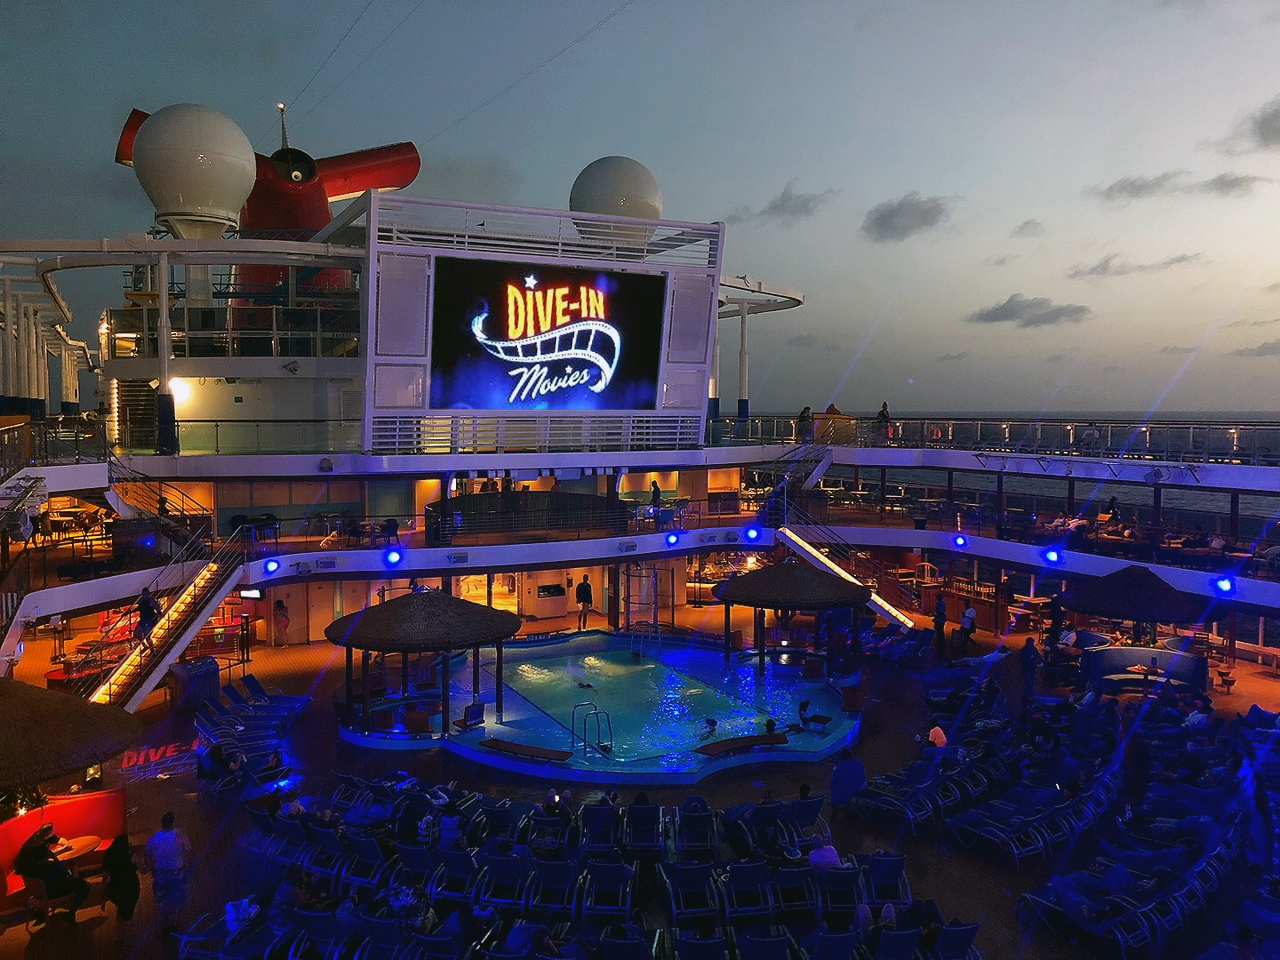 carnival cruise movies list